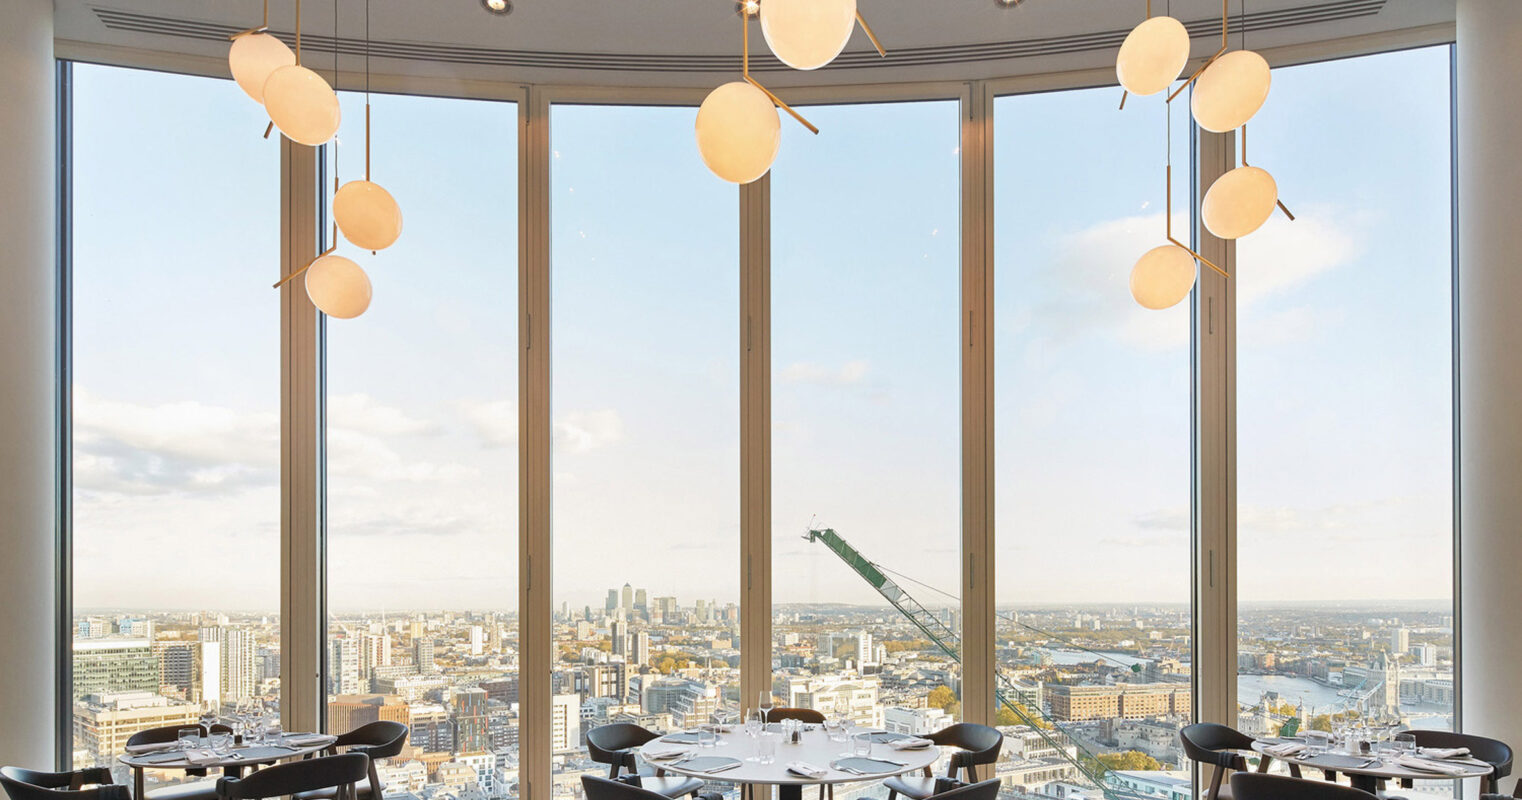 Elegant dining space featuring floor-to-ceiling windows providing panoramic city views, complemented by warm wooden flooring and spherical pendant lights. Scandinavian-inspired chairs and simple, chic tables set a minimalist yet inviting tone.